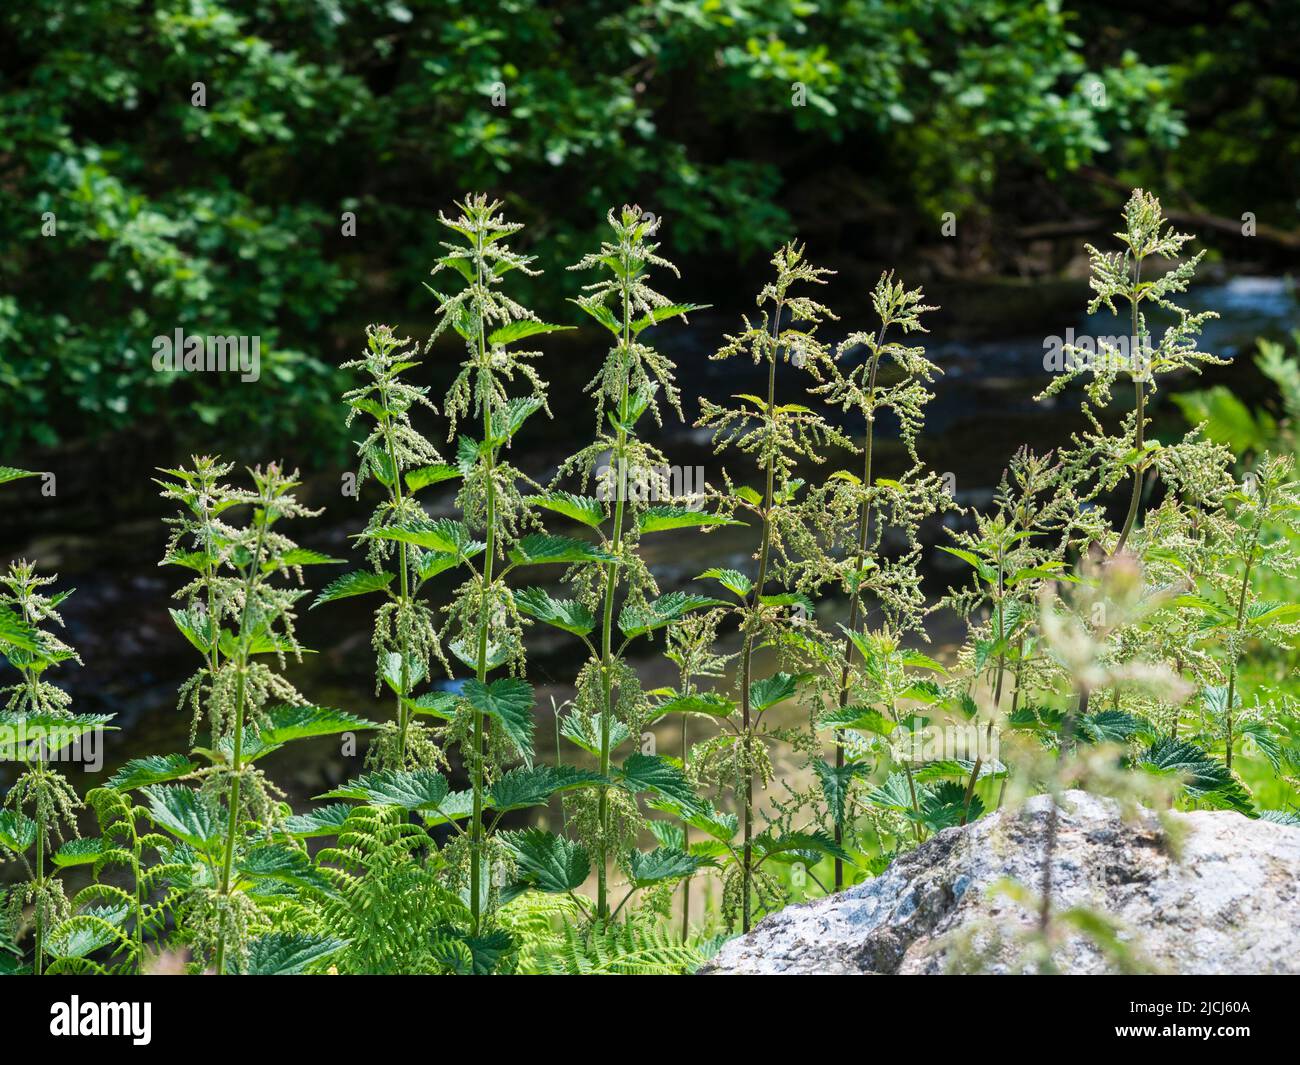 Flowering stinging nettle, Urtica dioica ssp. dioica, growing in a line on the banks of the River Avon above Shipley Bridge, Darmoor, UK Stock Photo